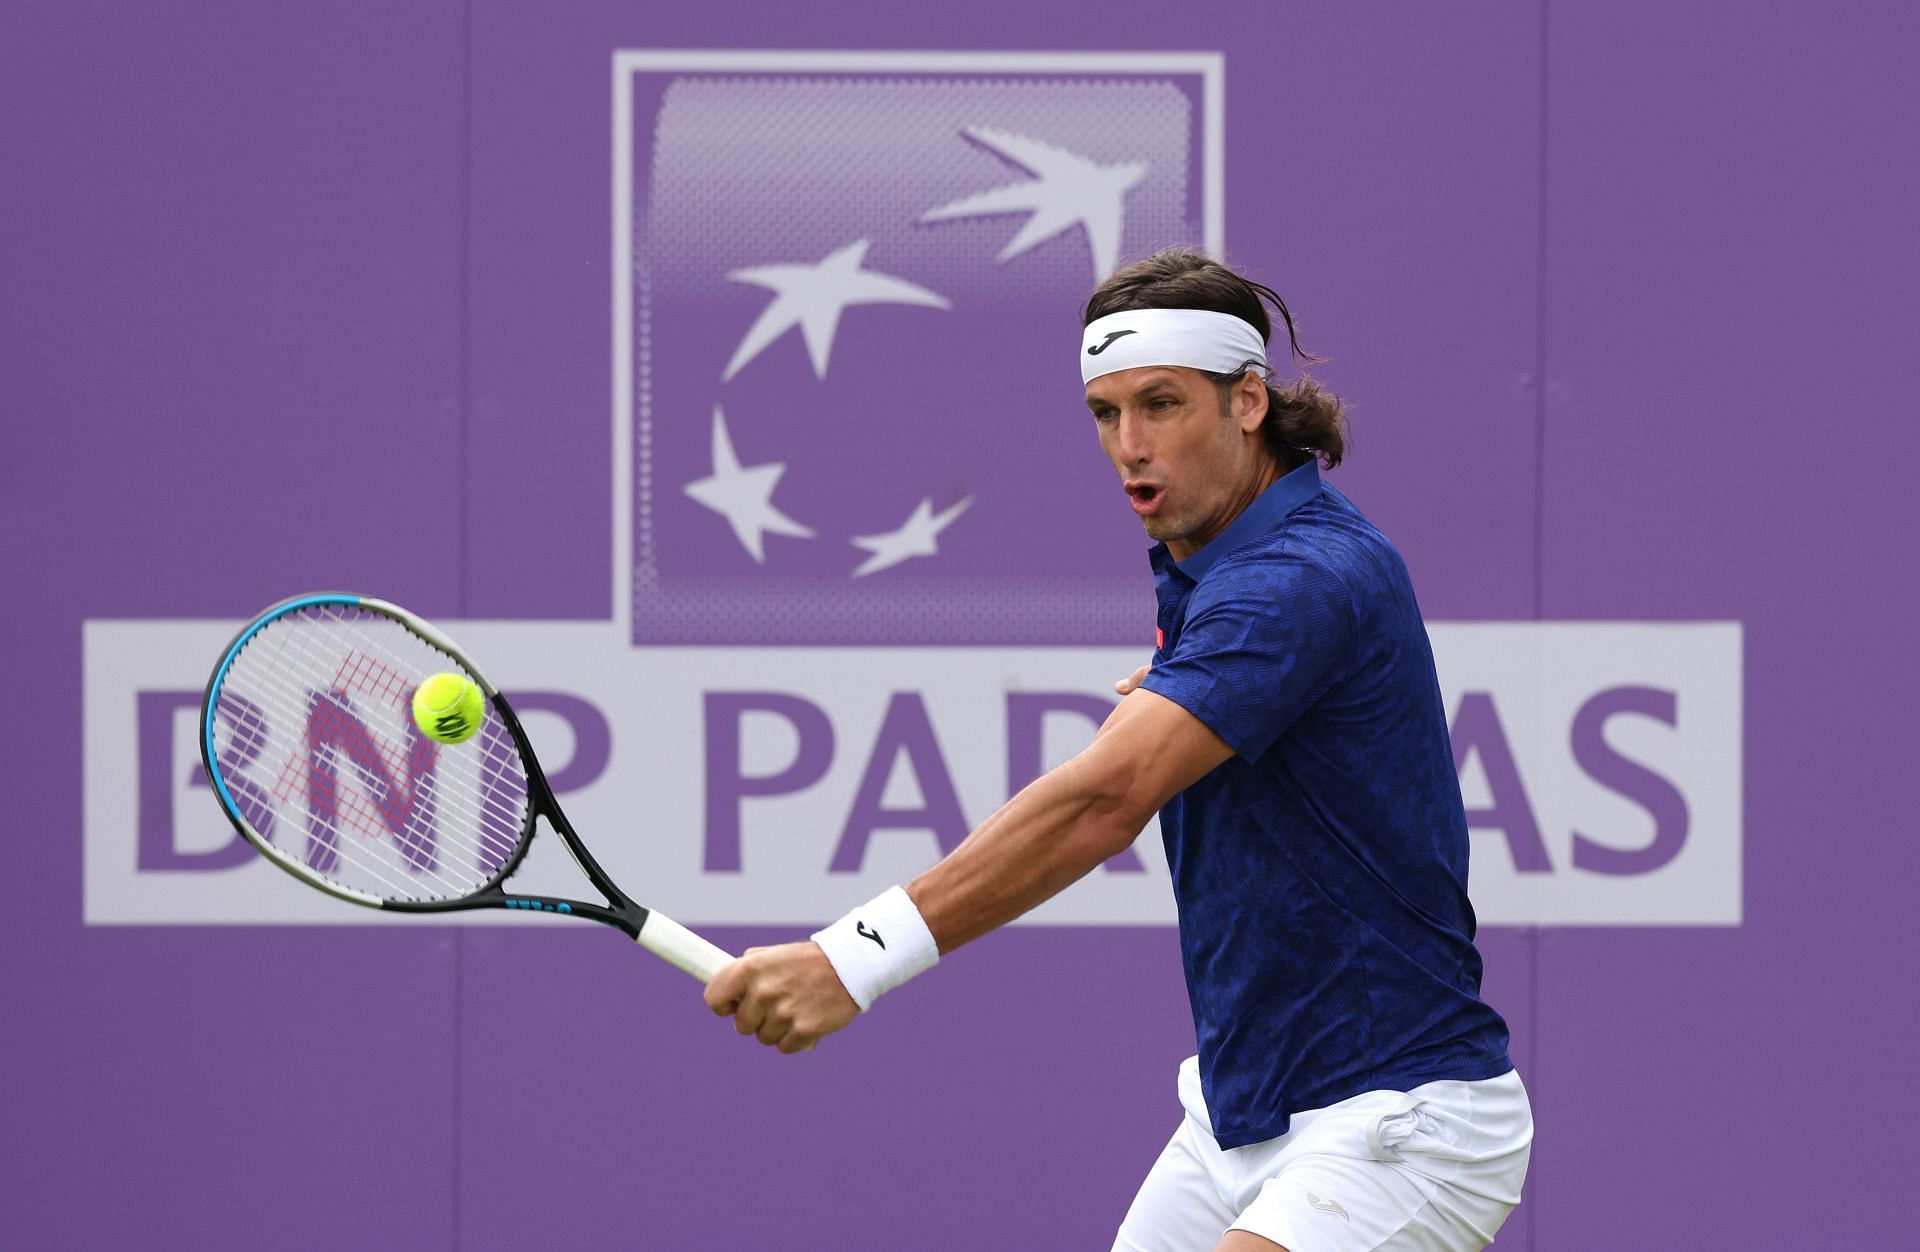 Feliciano Lopez in action during a tournament